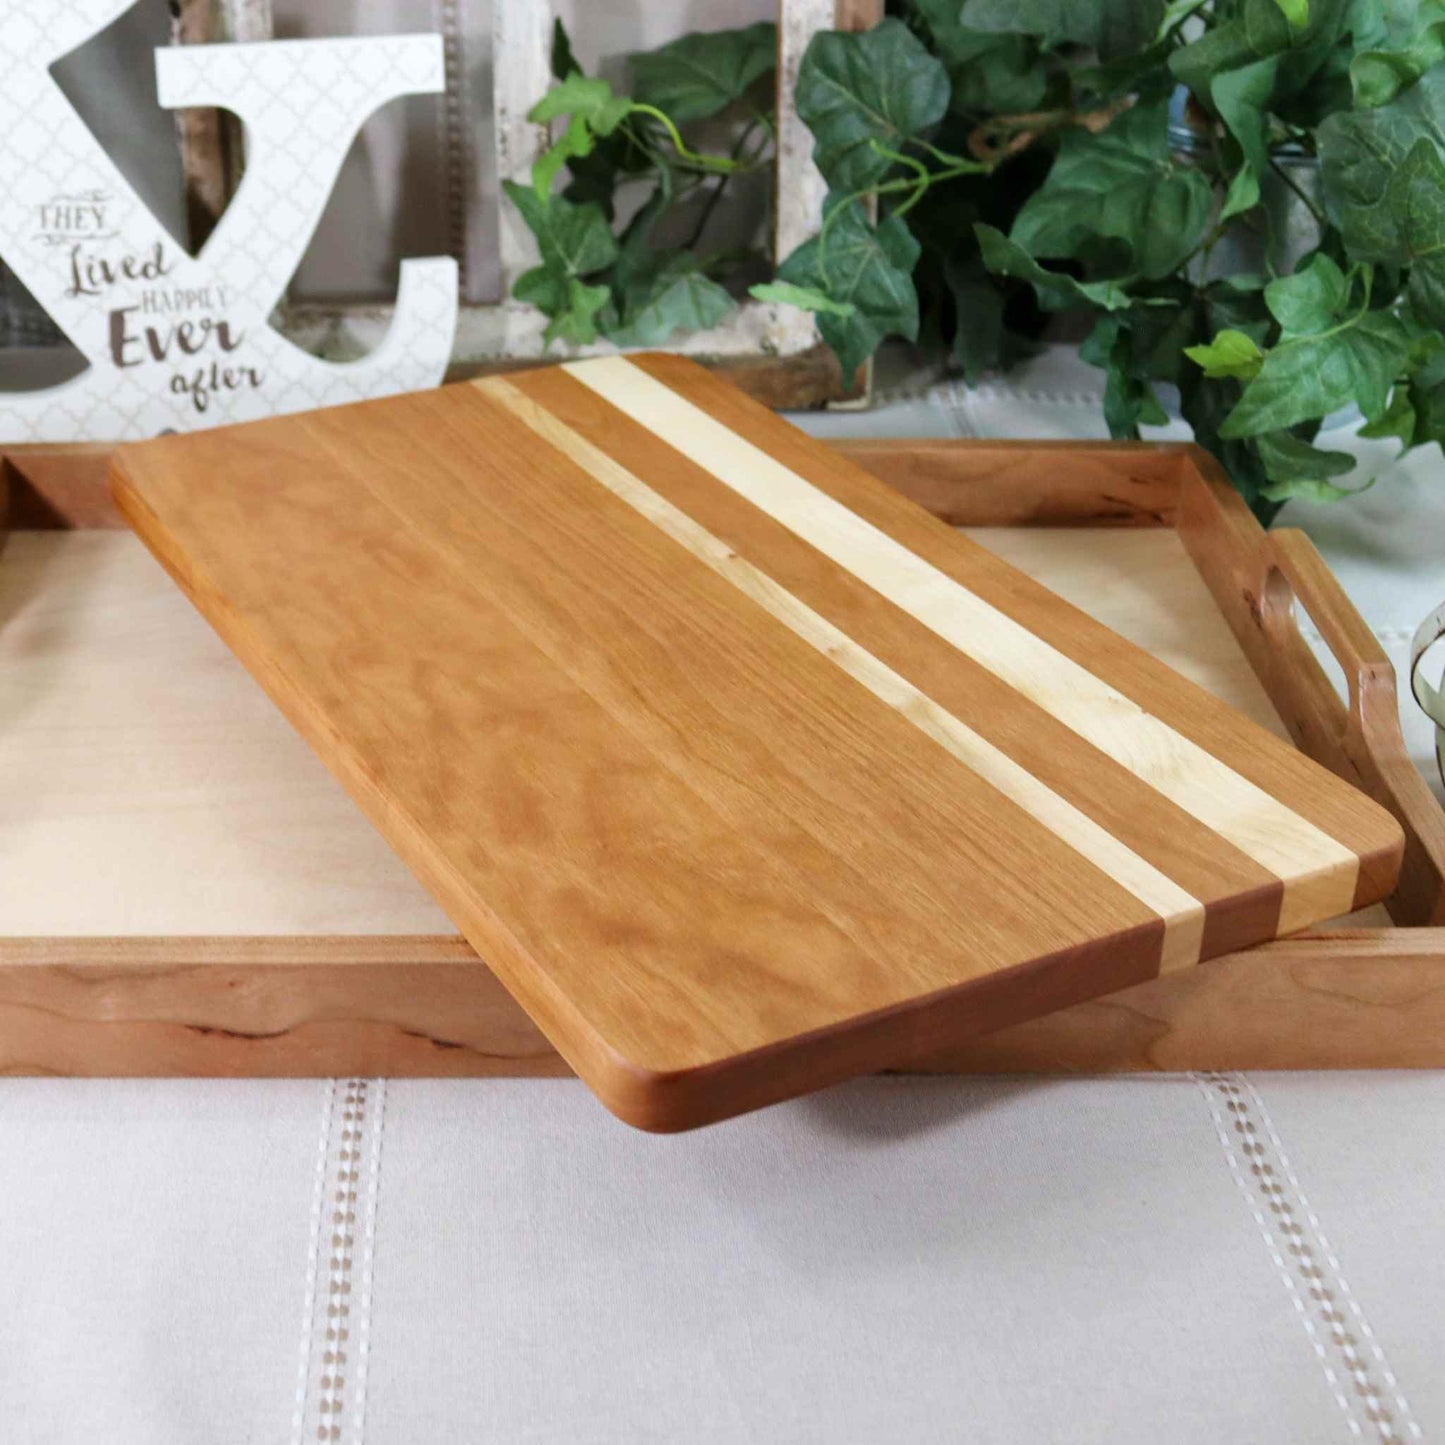 4-PC Cherry Wood Tray, Cutting Board, Wine Carrier & Coaster Set